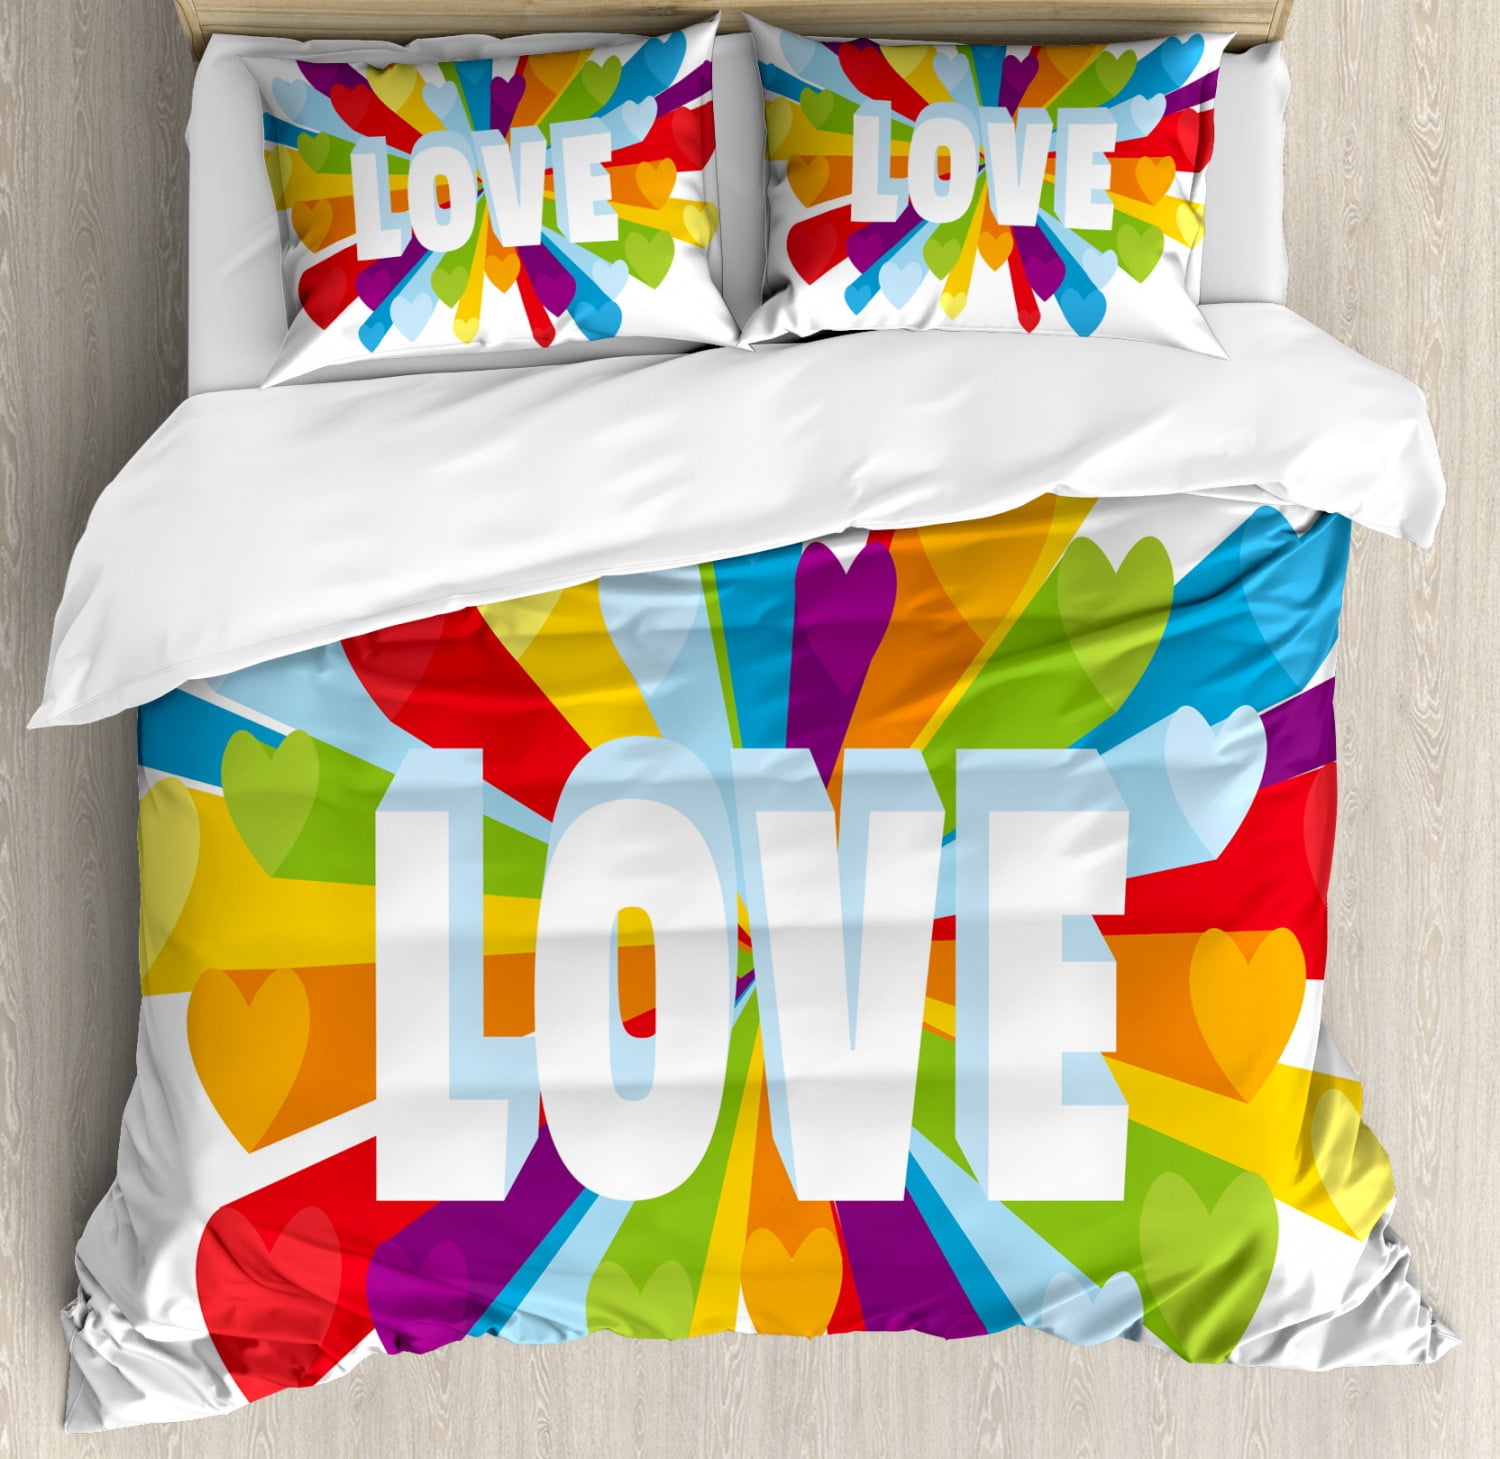 Rainbow Colorful LGBT Pride Lips Comfortable Throw Blanket Plush Soft Cozy Quilt Bedding Decor Bedroom Decorations Wearable 